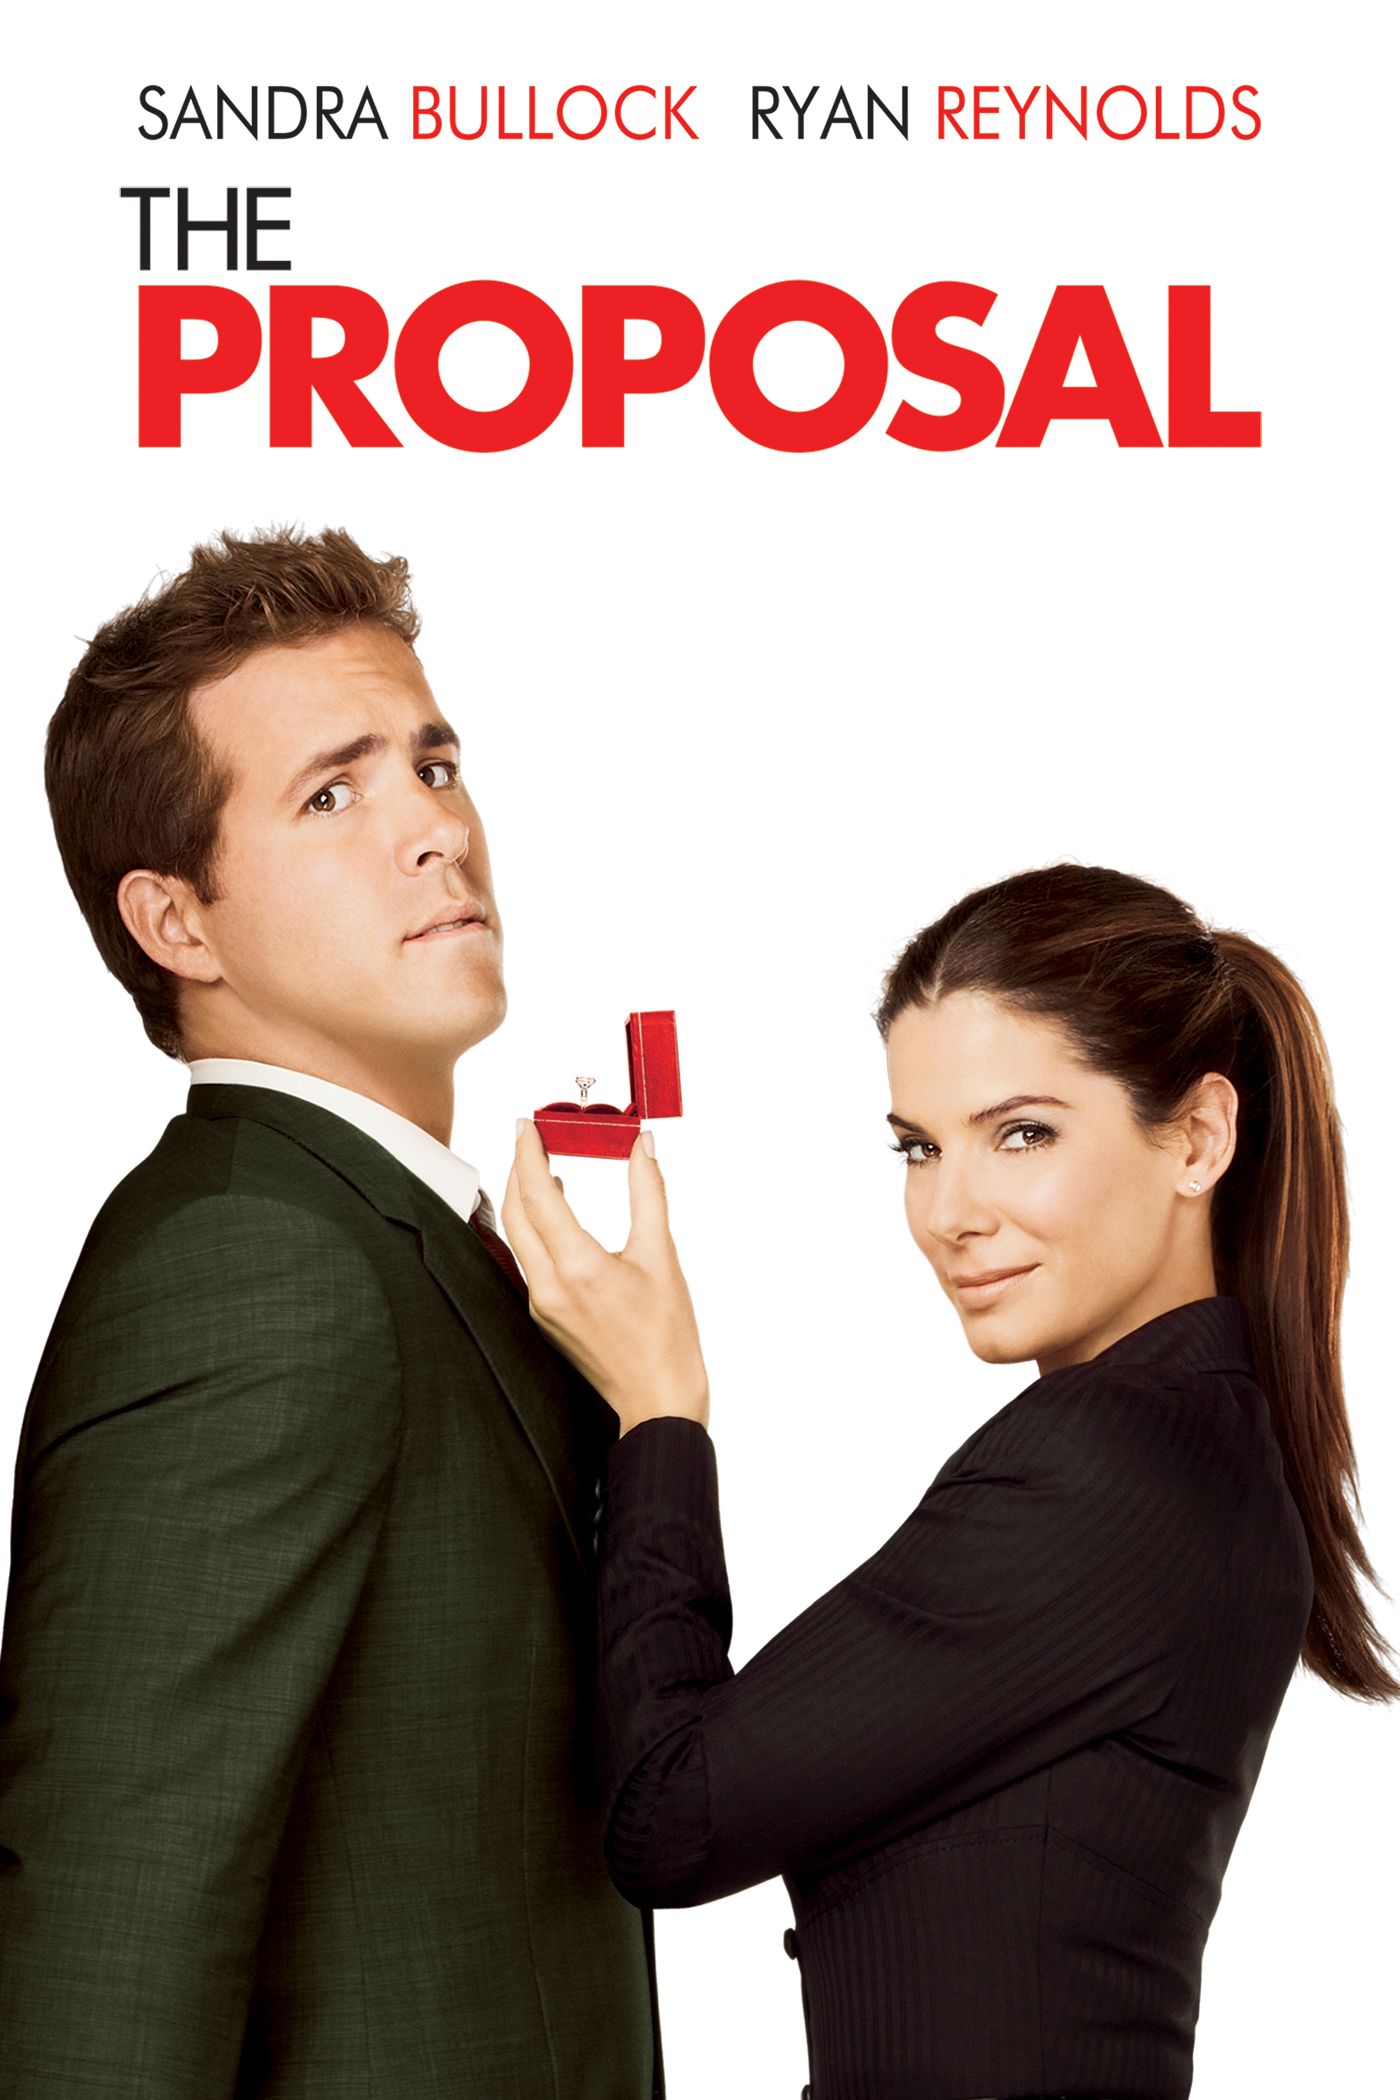 the proposal movie cast